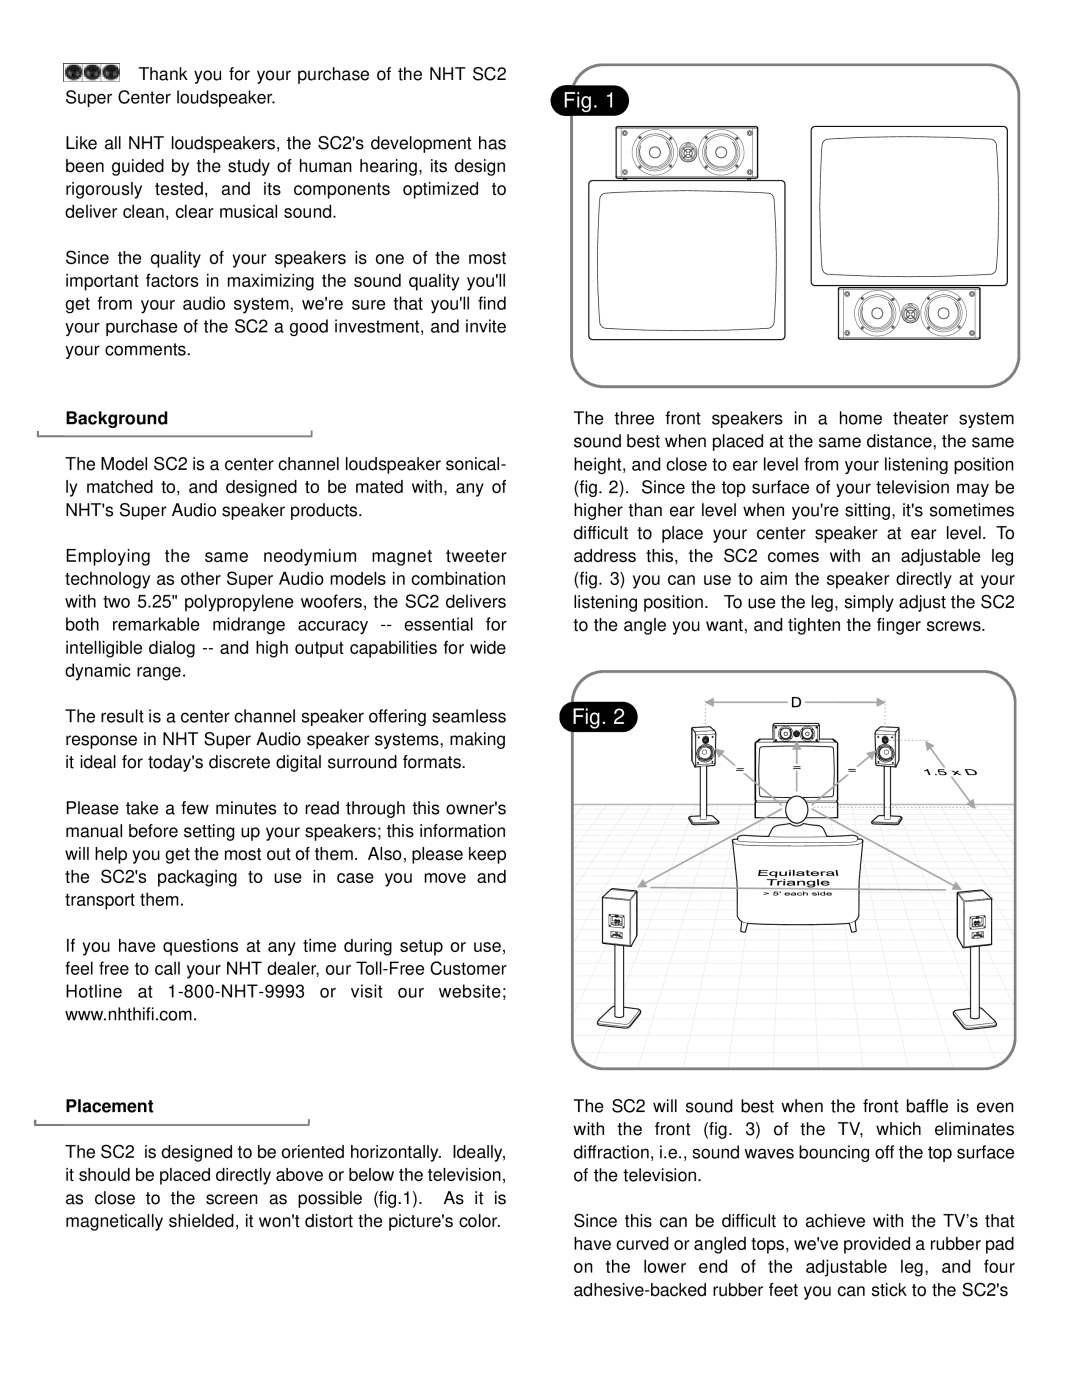 NHT Sc 2 user manual Background, Placement 